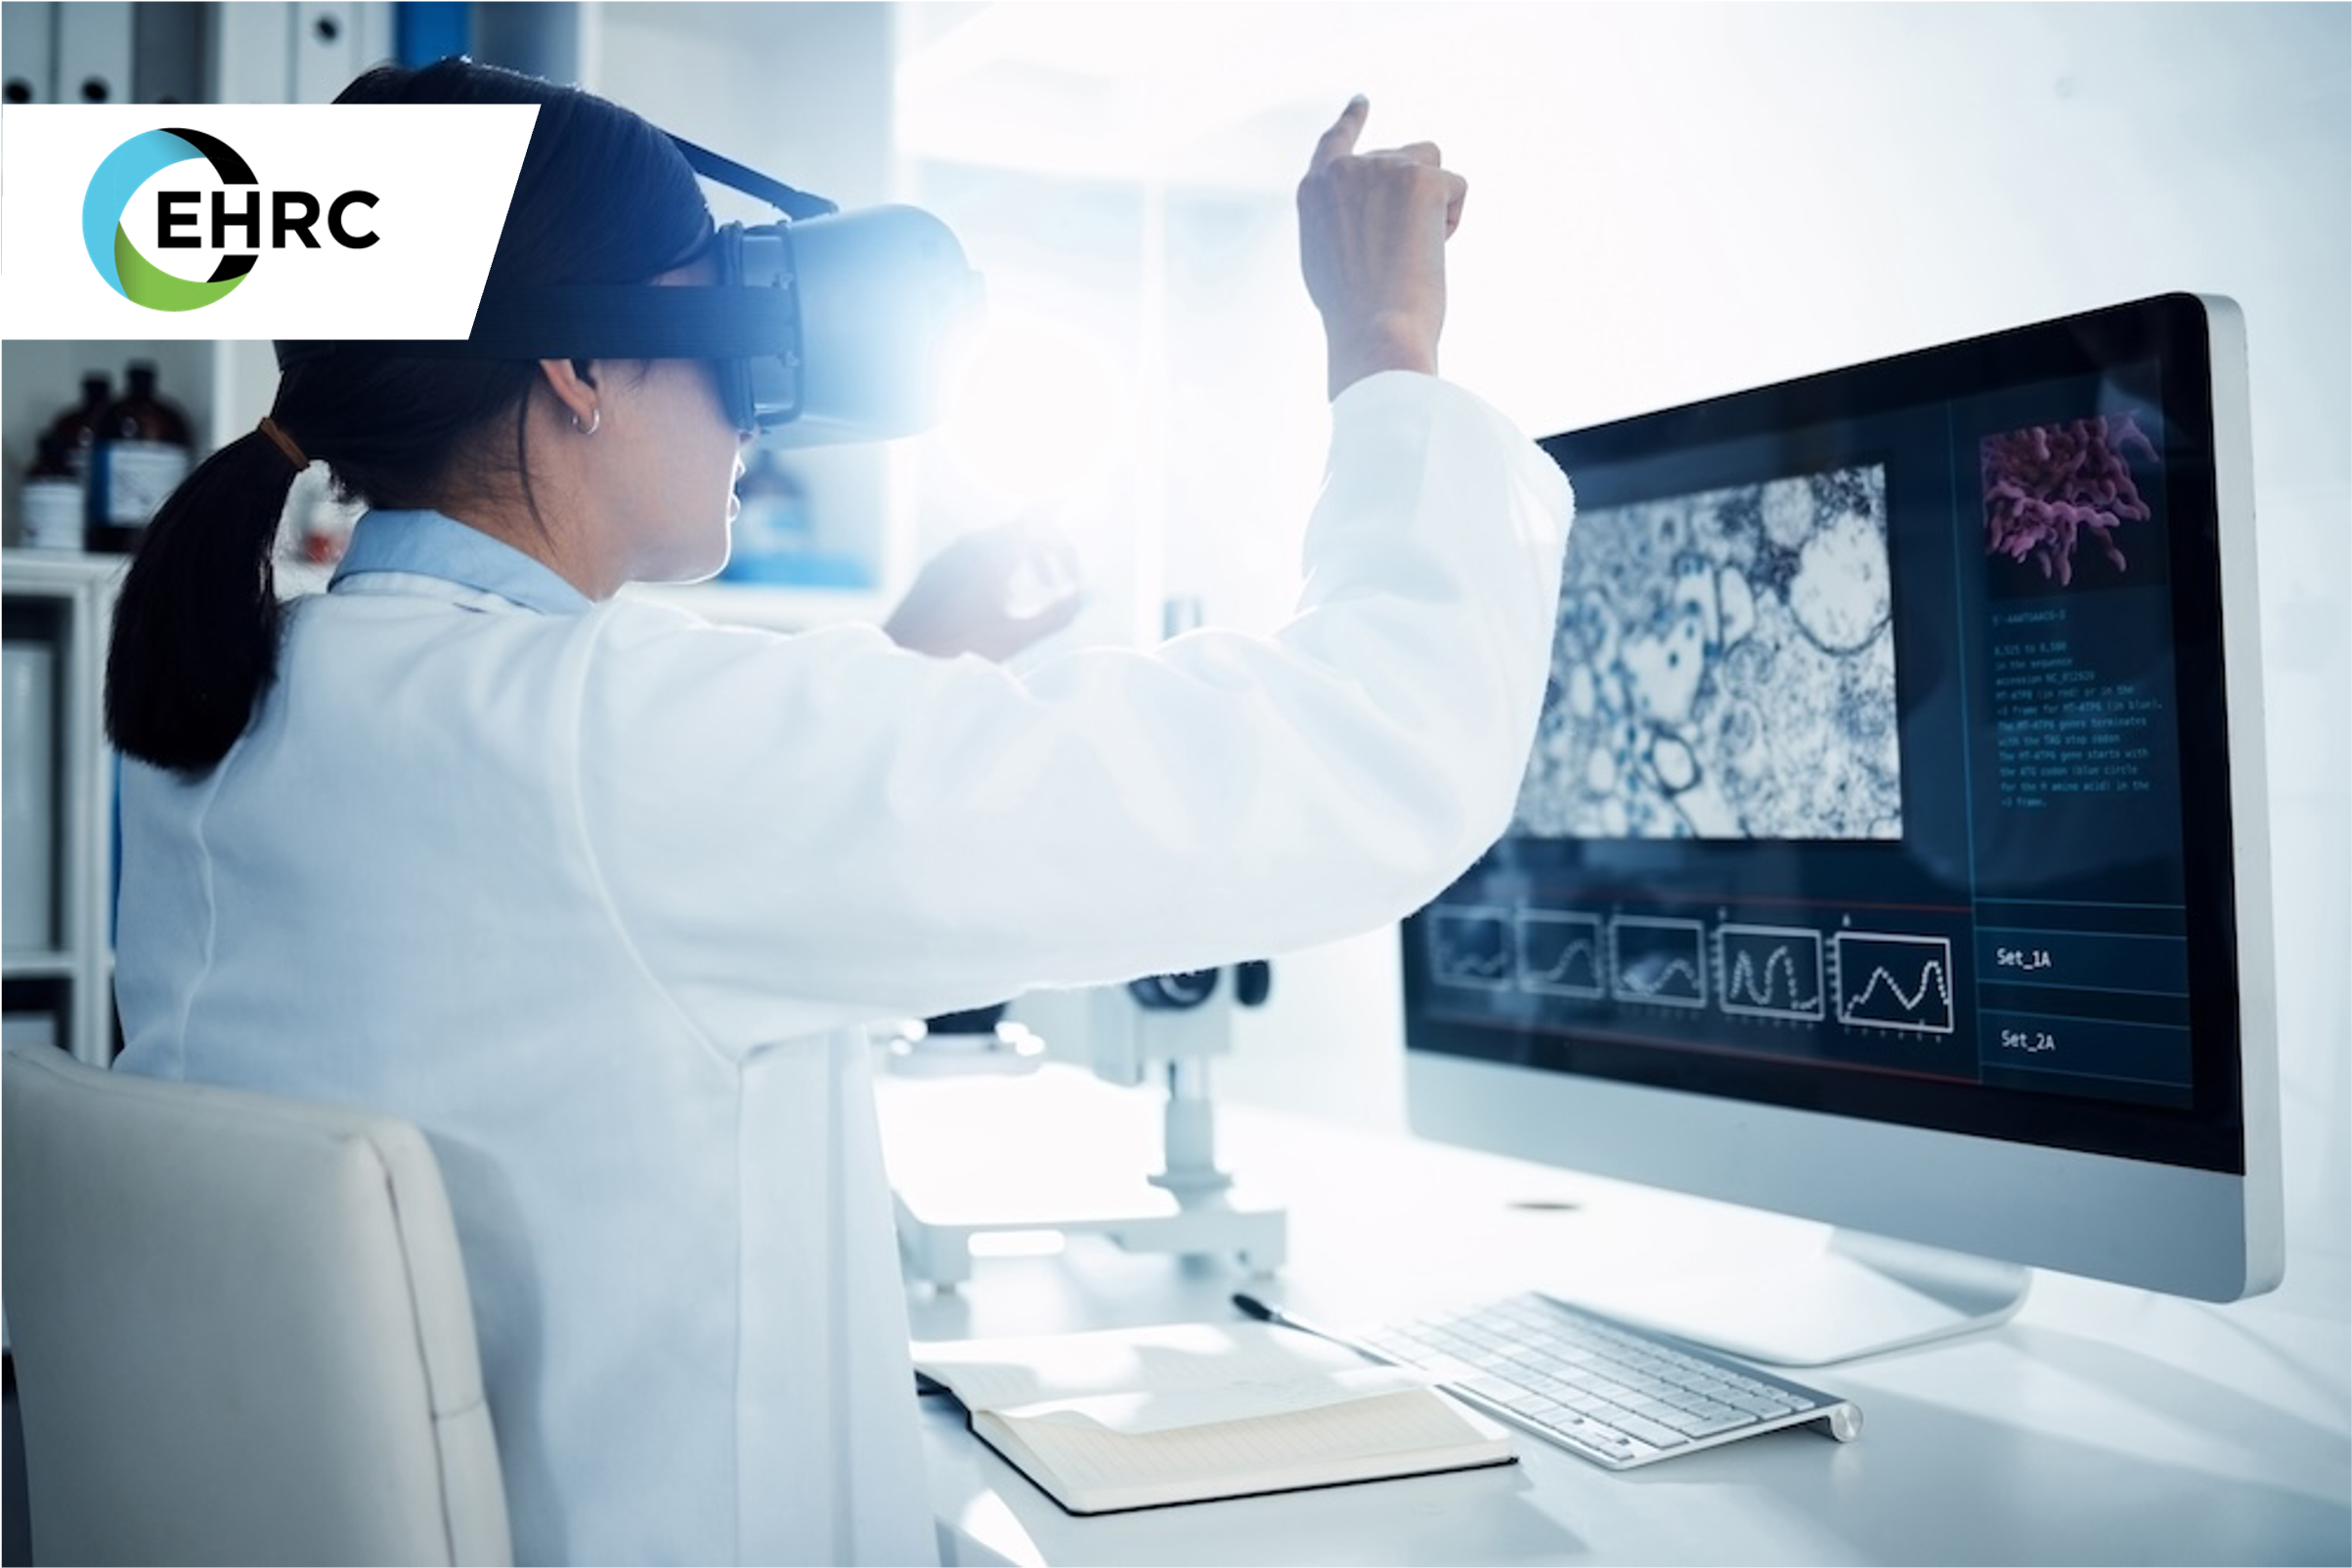 Healthcare IT And the Metaverse: What Do You Think Is the Future of Patient Care?